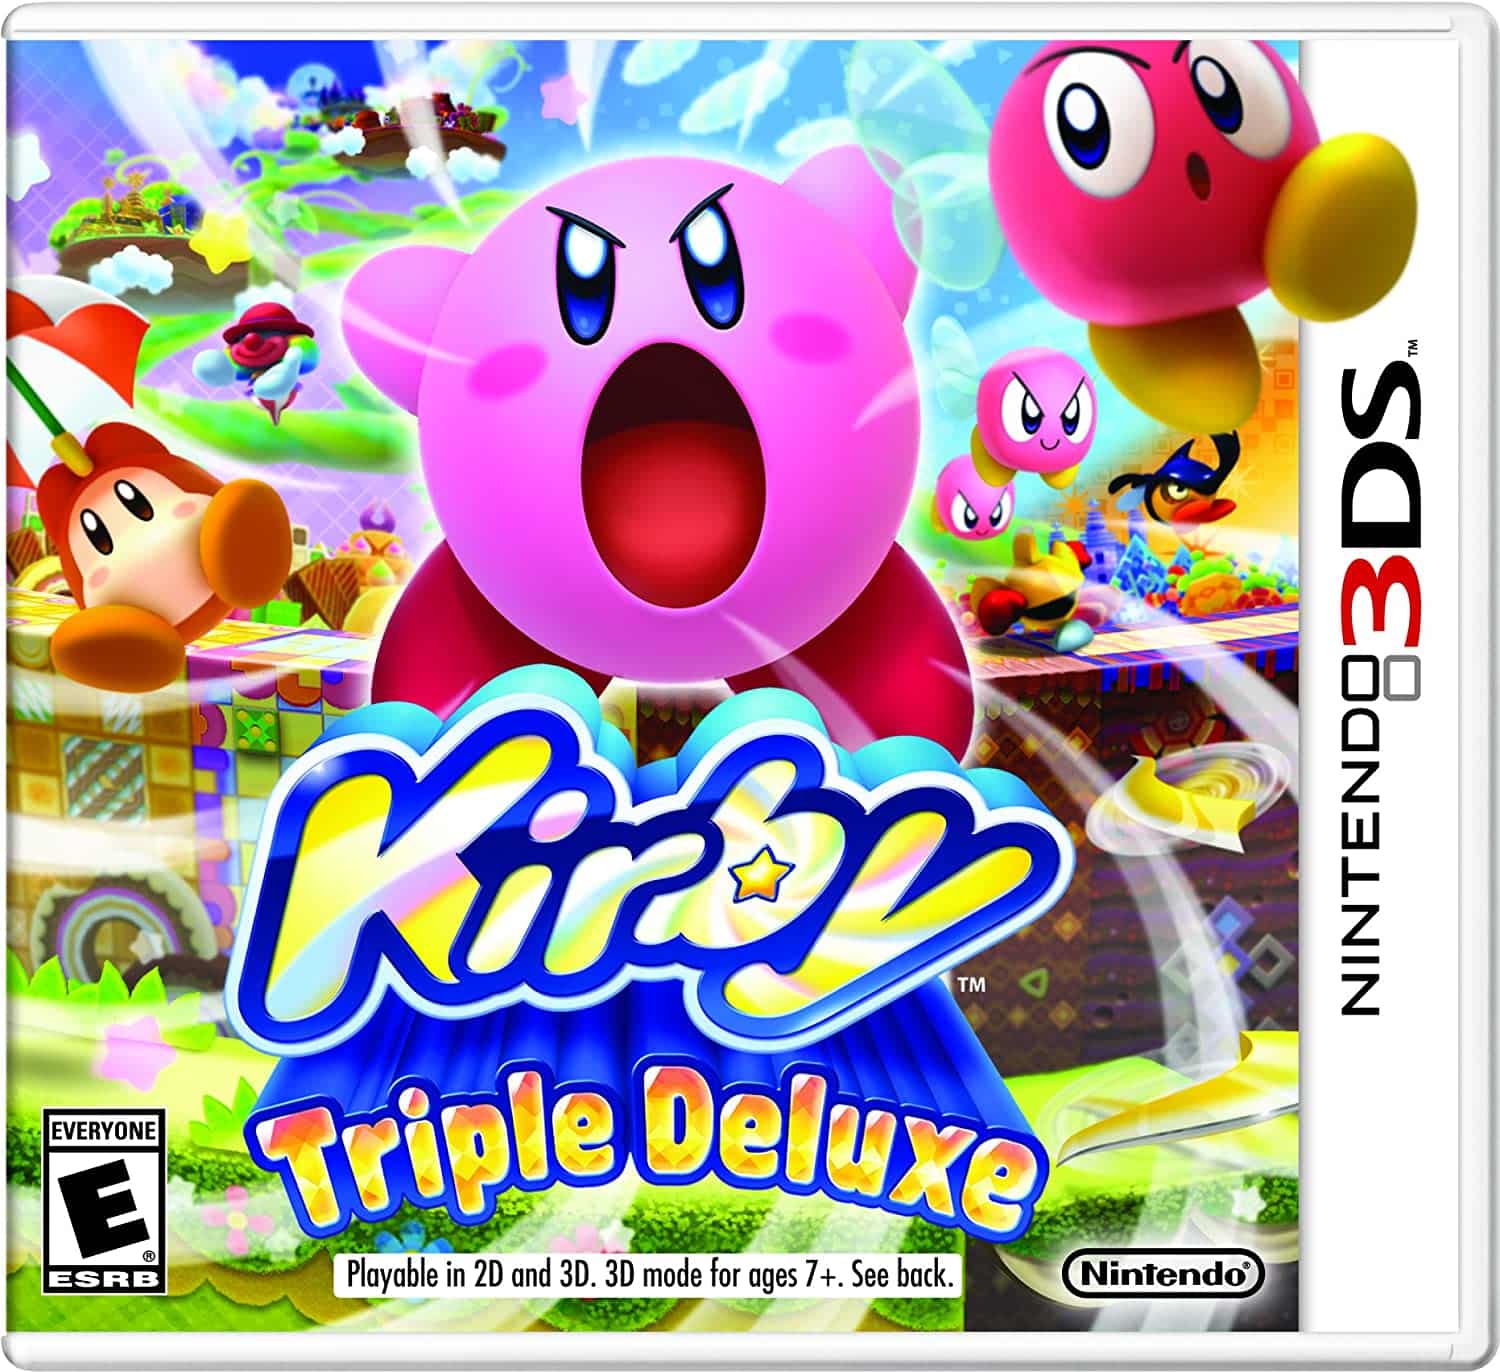 Kirby: Triple Deluxe player count stats